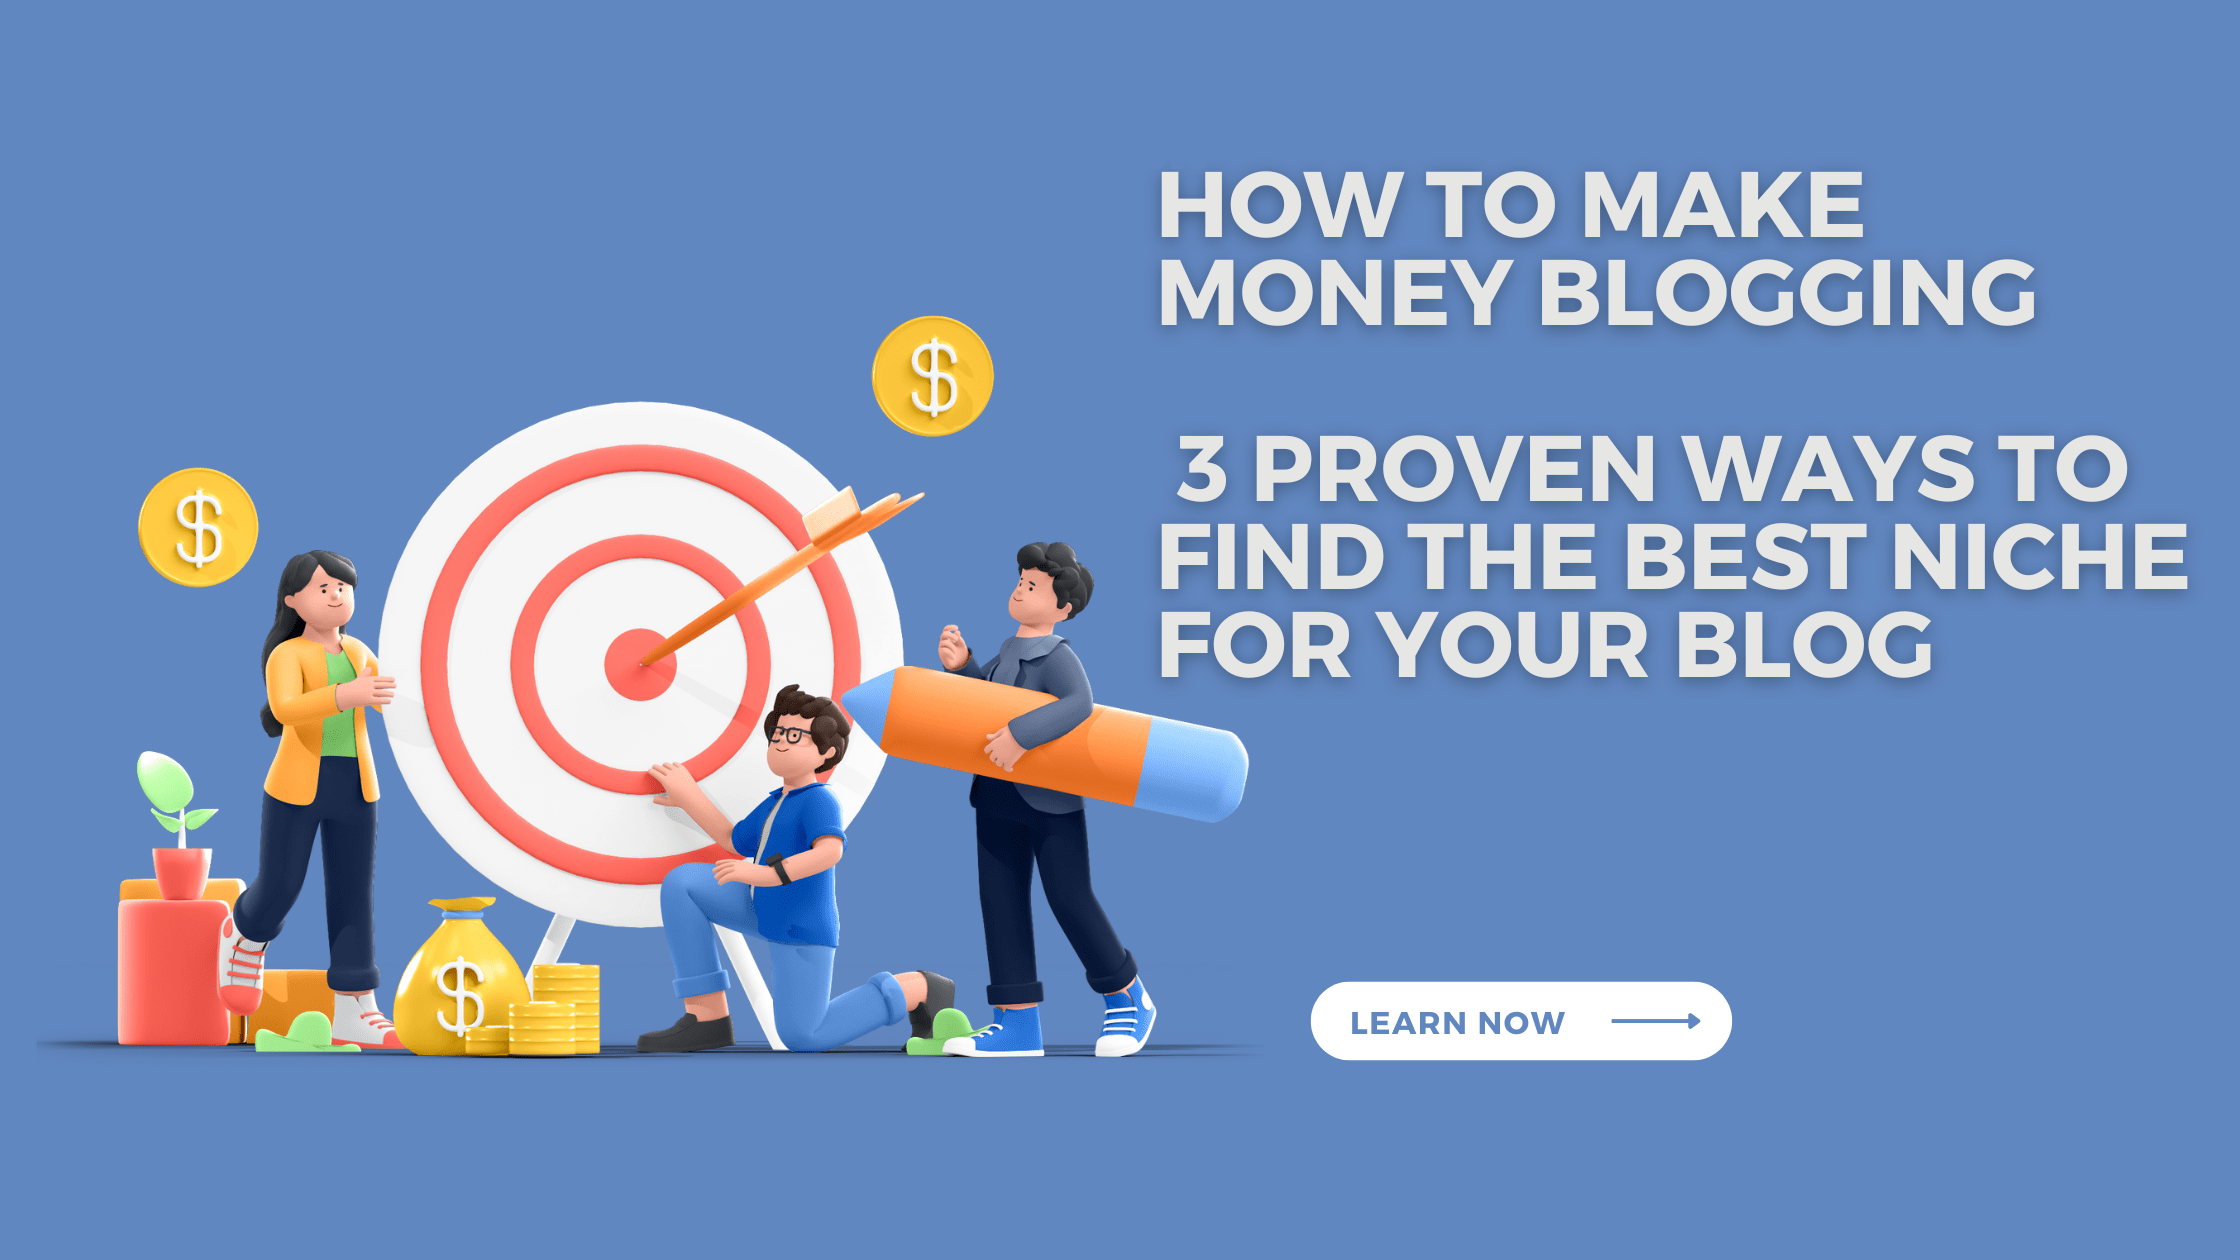 How to Make Money Blogging 3 Proven Ways to Find the Best Niche for Your Blog